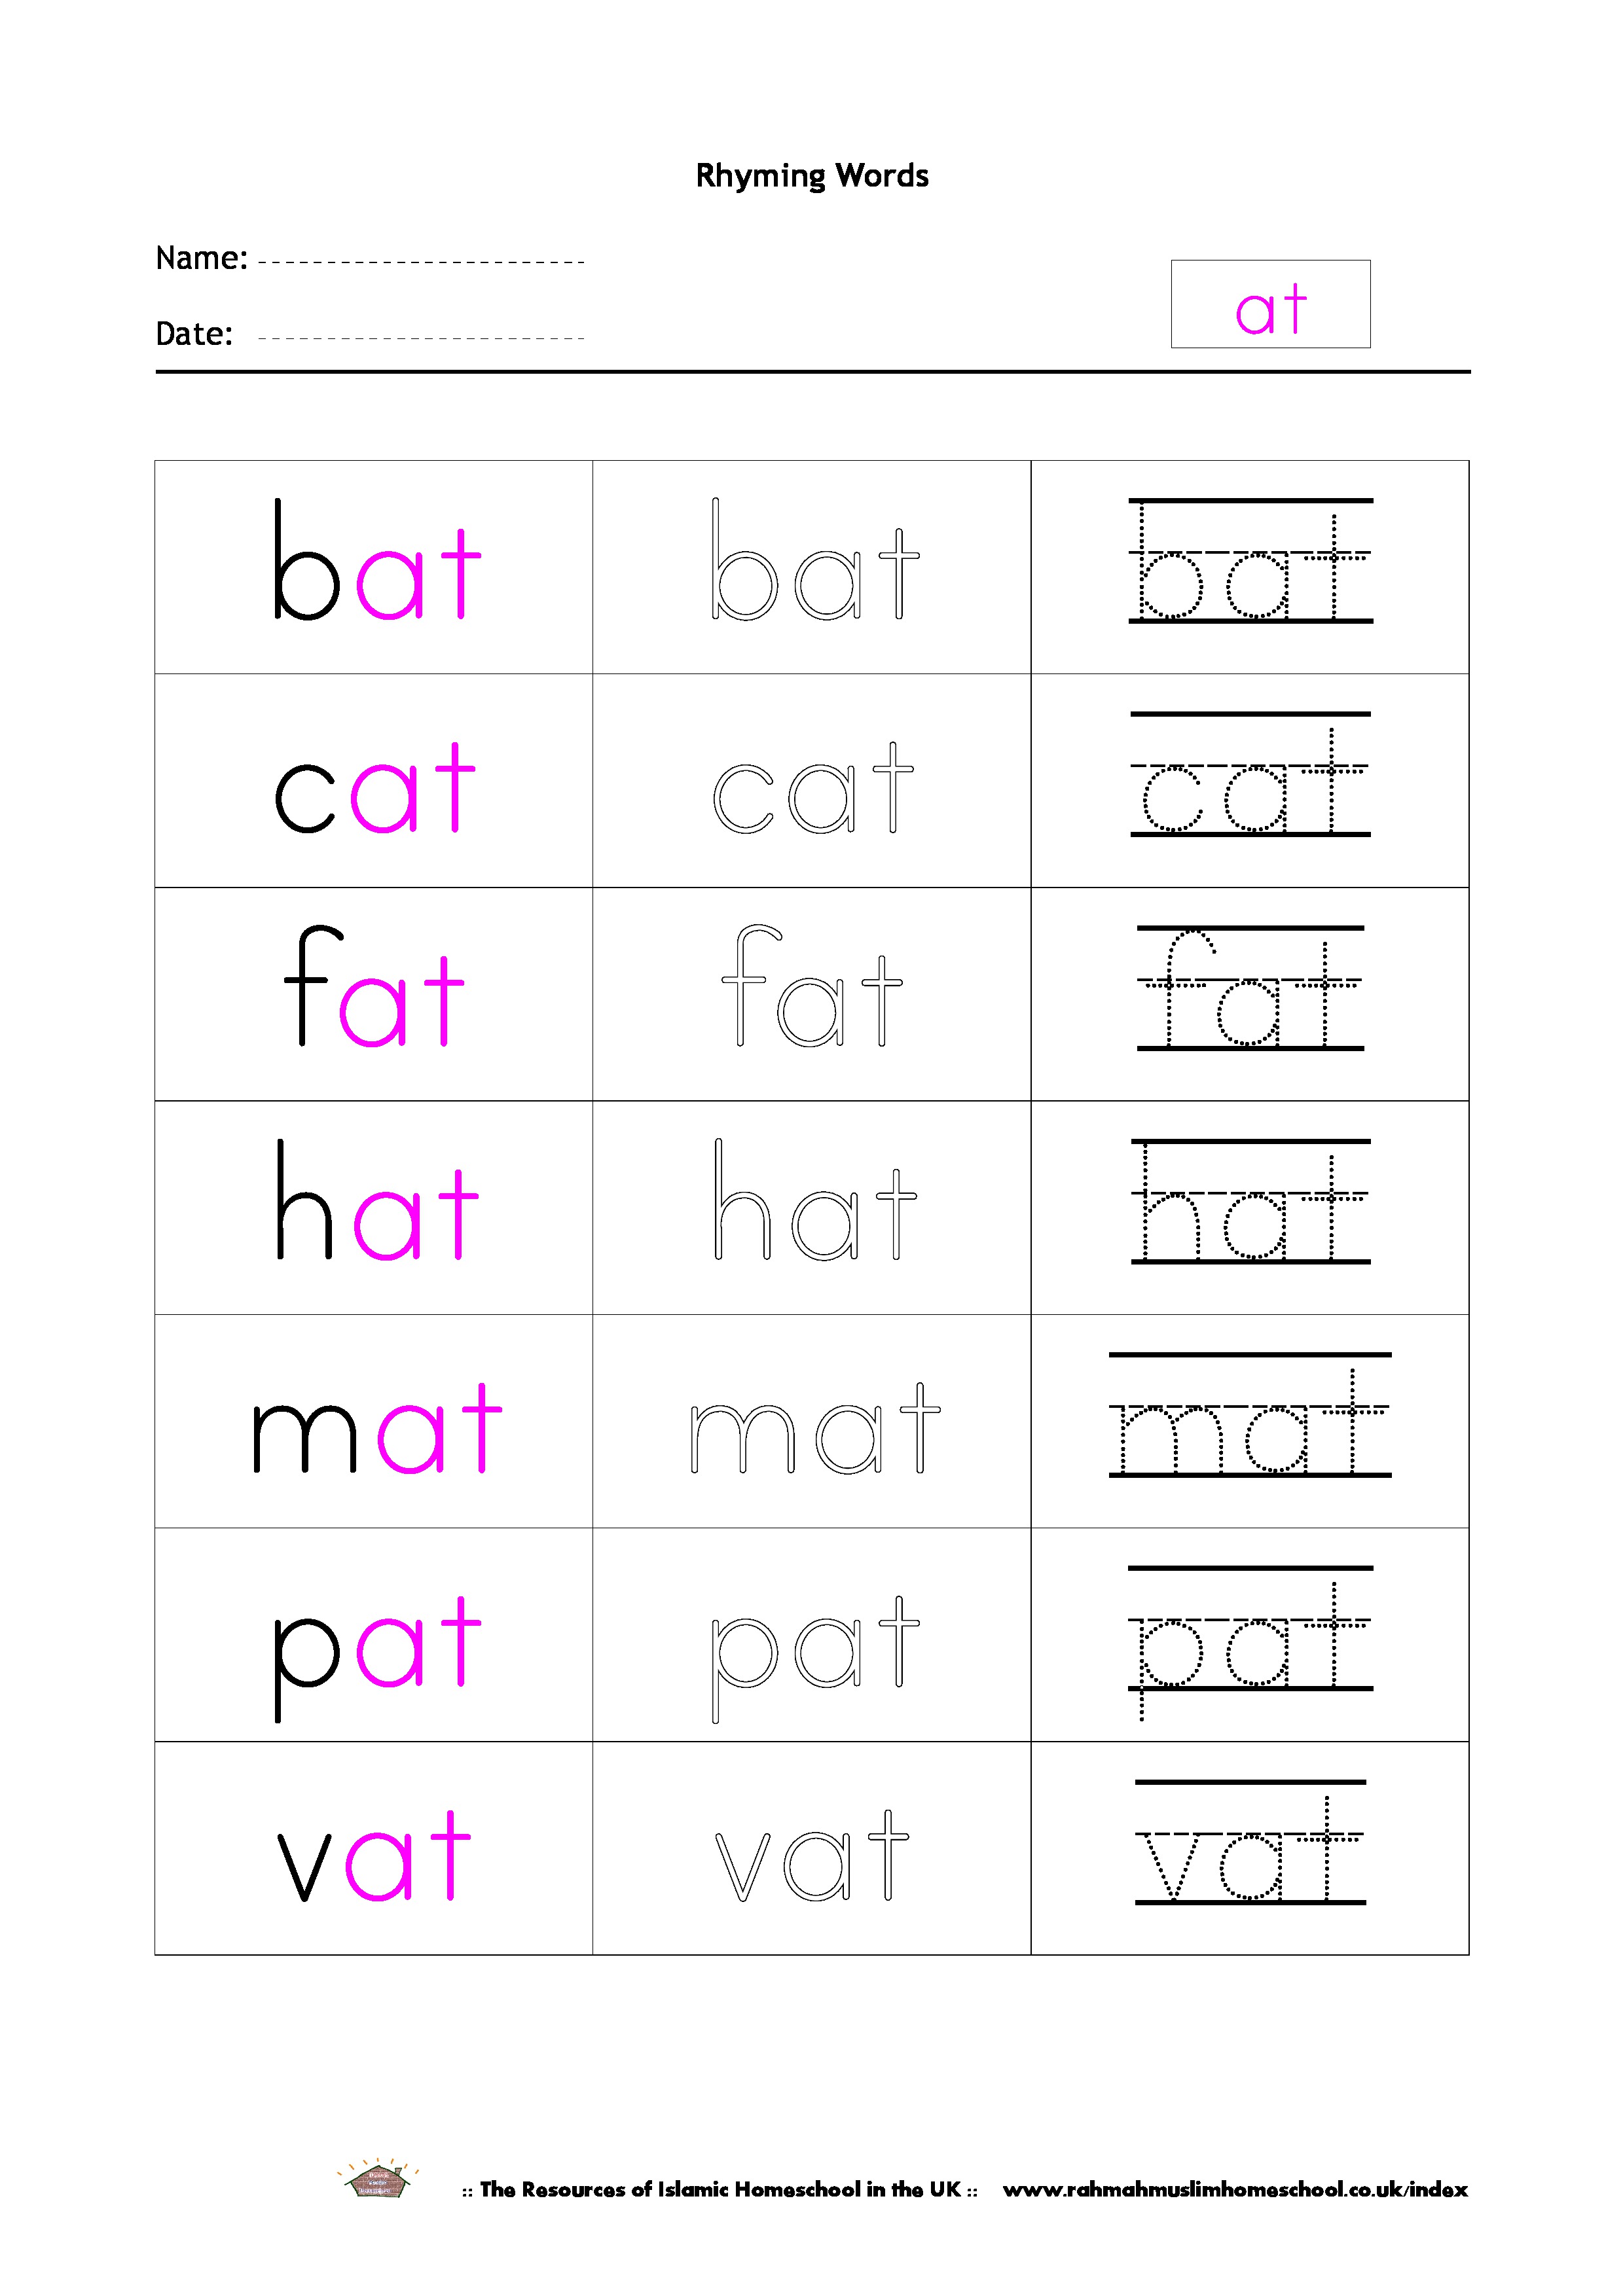 Free Rhyming Words Worksheet "at" | The Resources of ...